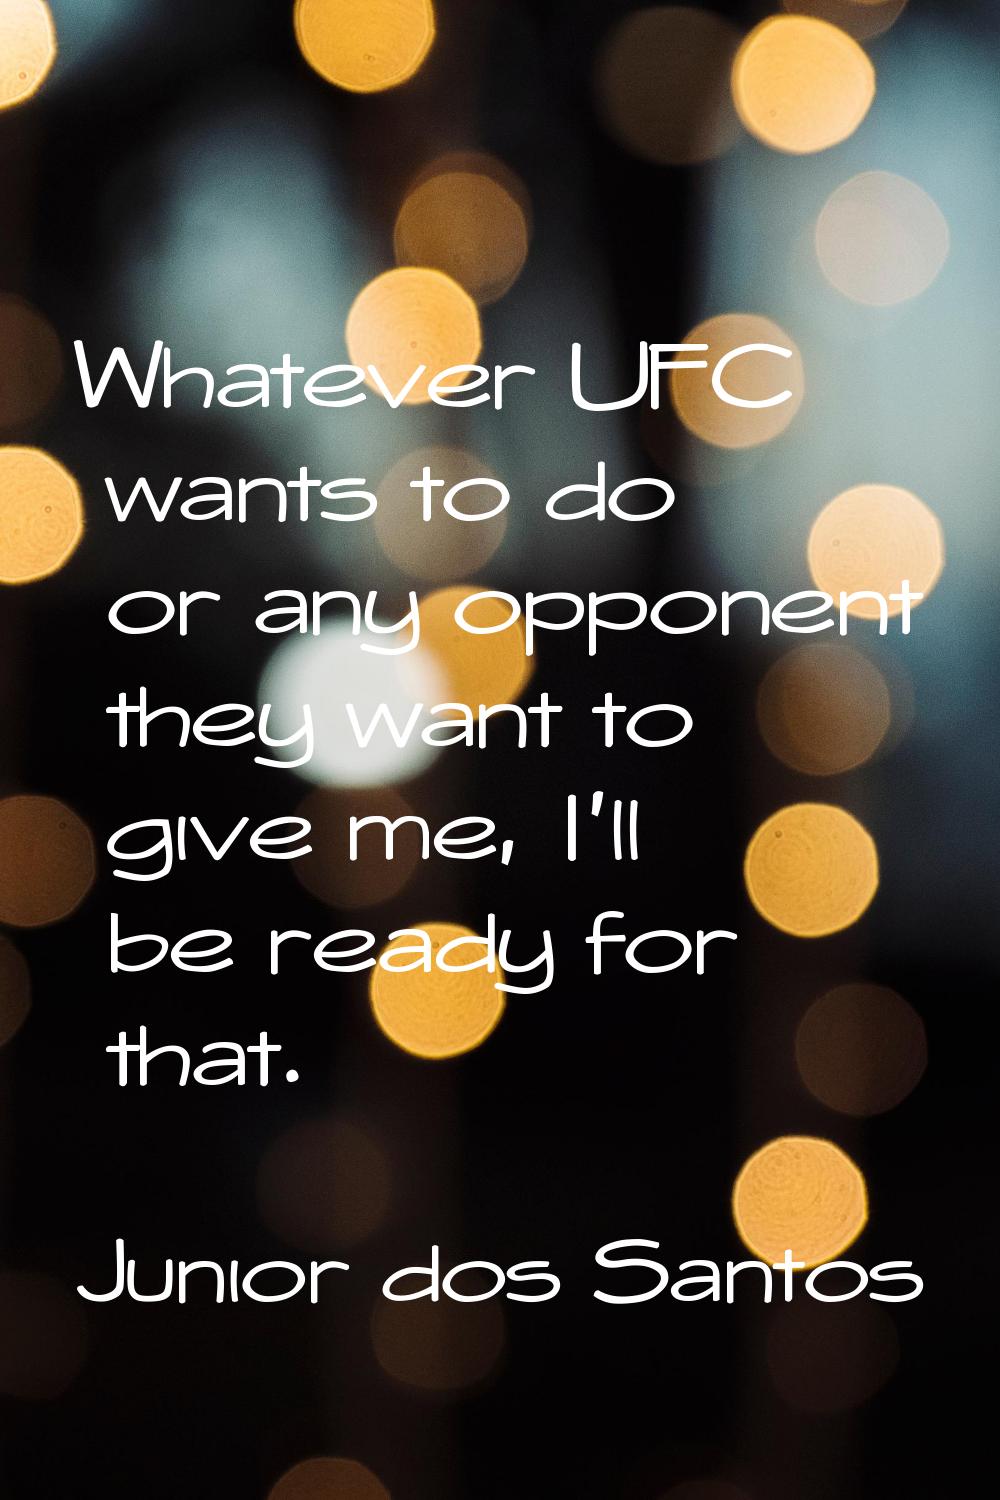 Whatever UFC wants to do or any opponent they want to give me, I'll be ready for that.